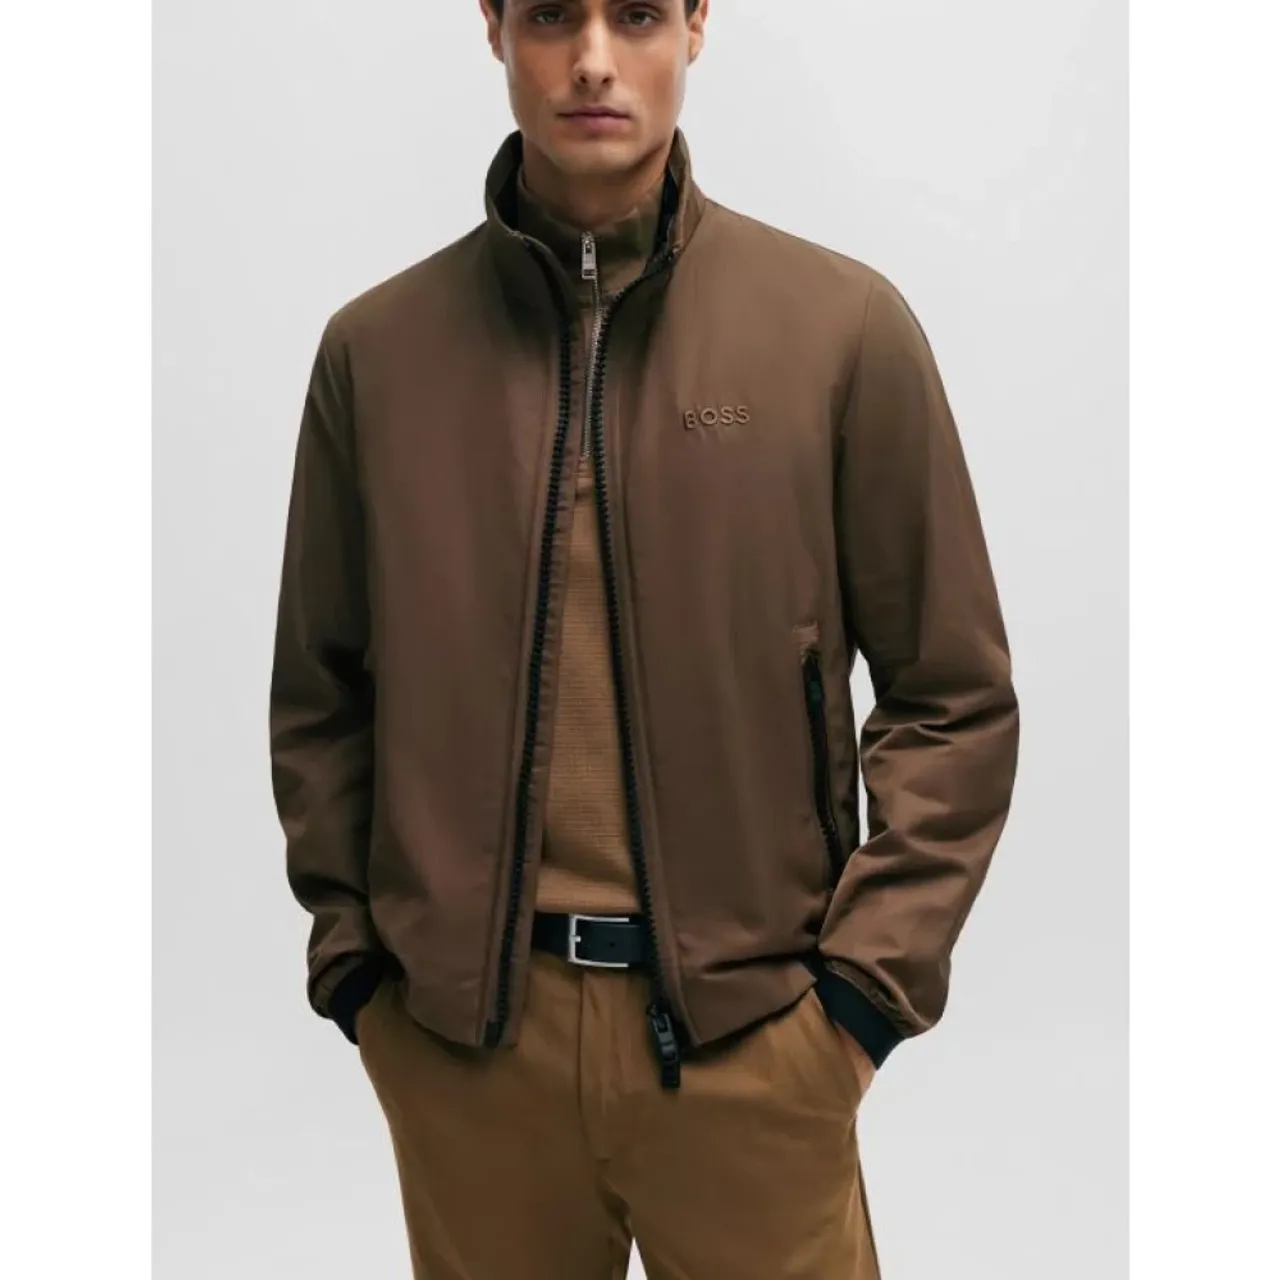 Hugo Boss , Brown Zip Coat with Pockets ,Brown male, Sizes: